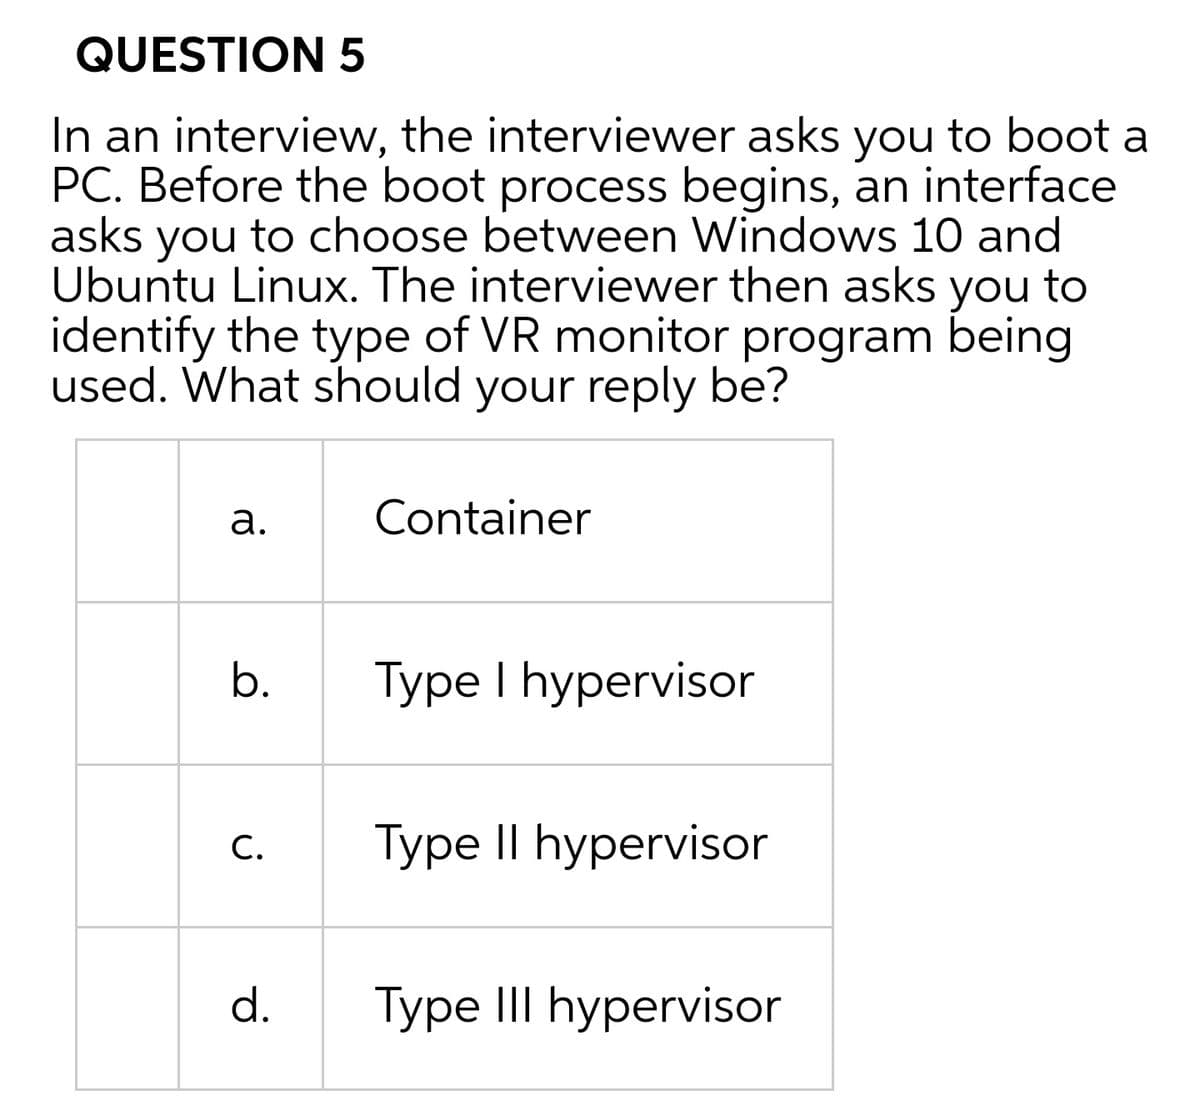 QUESTION 5
In an interview, the interviewer asks you to boot a
PC. Before the boot process begins, an interface
asks you to choose between Windows 10 and
Ubuntu Linux. The interviewer then asks you to
identify the type of VR monitor program being
used. What should your reply be?
а.
Container
b.
Type I hypervisor
С.
Type II hypervisor
d.
Type III hypervisor
